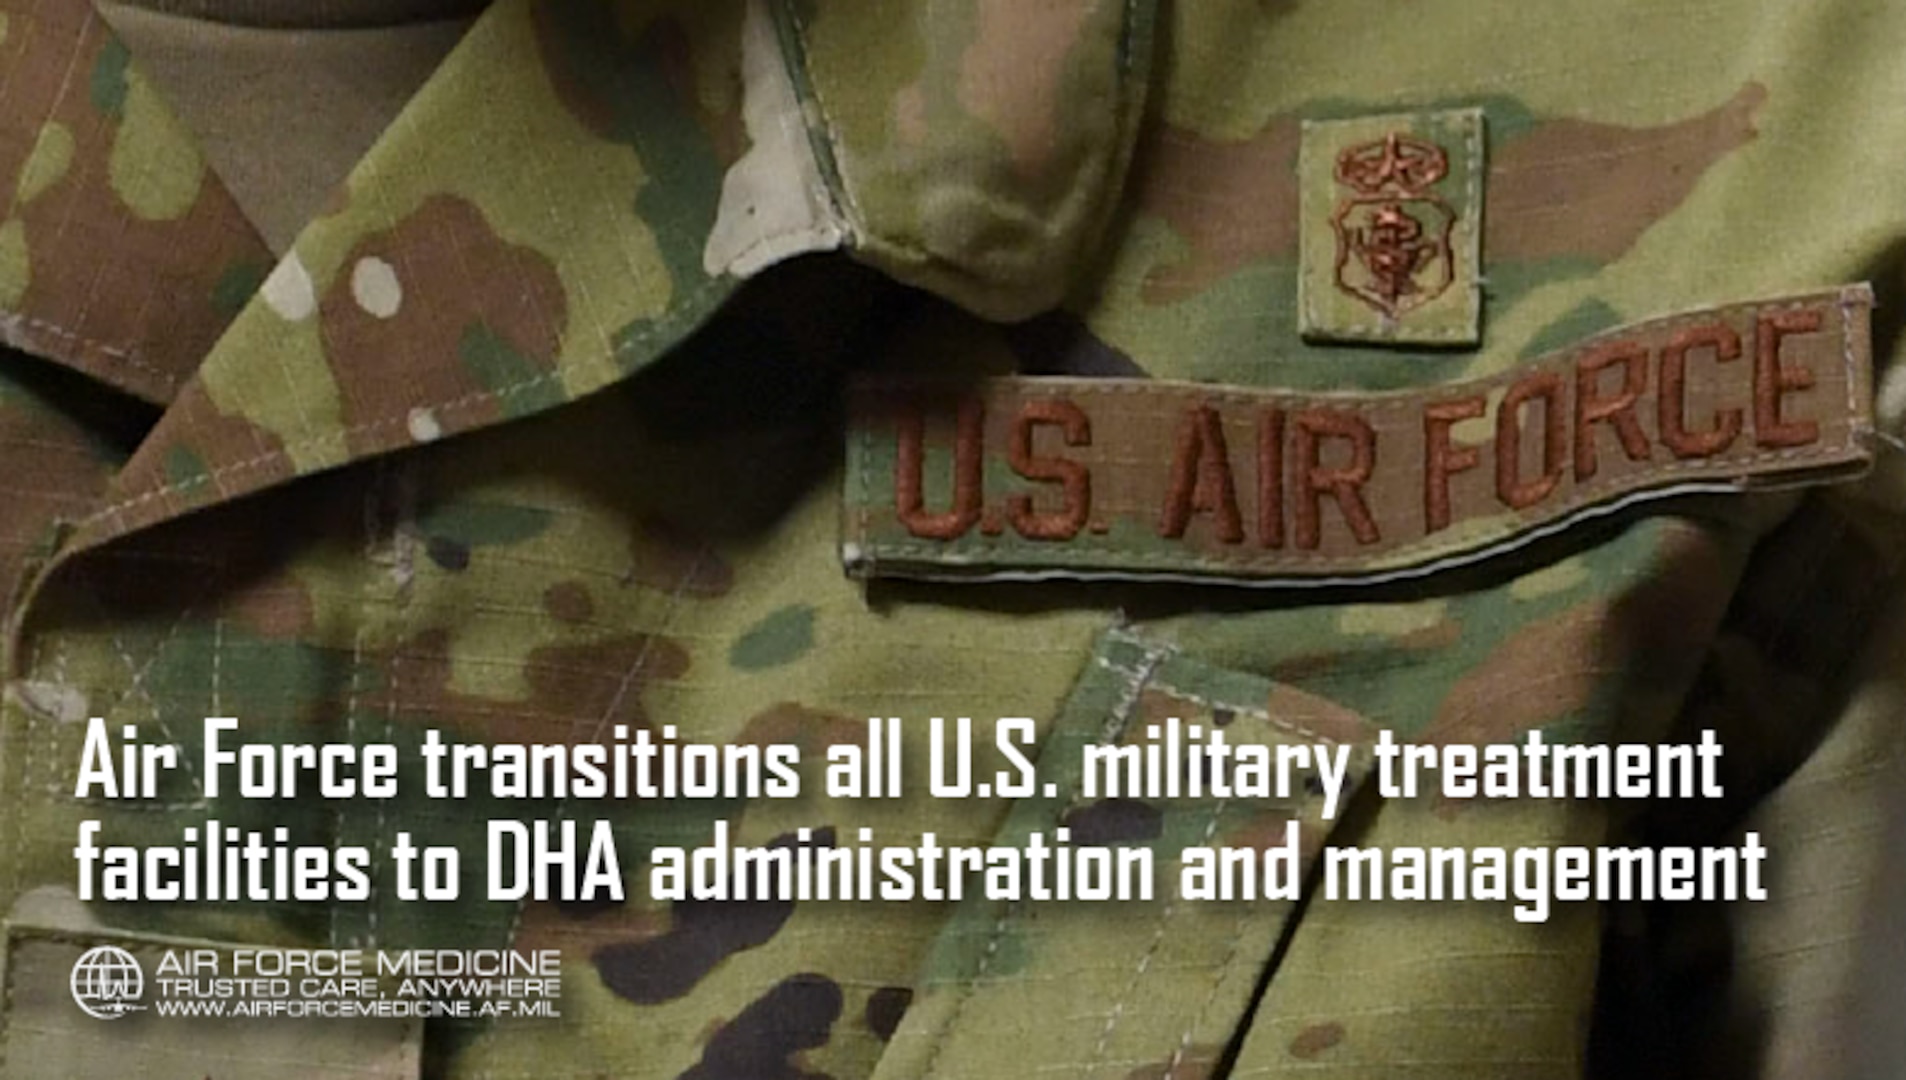 This October, U.S.-based Air Force military treatment facilities transferred administration and management to the Defense Health Agency. (U.S. Air Force illustration)